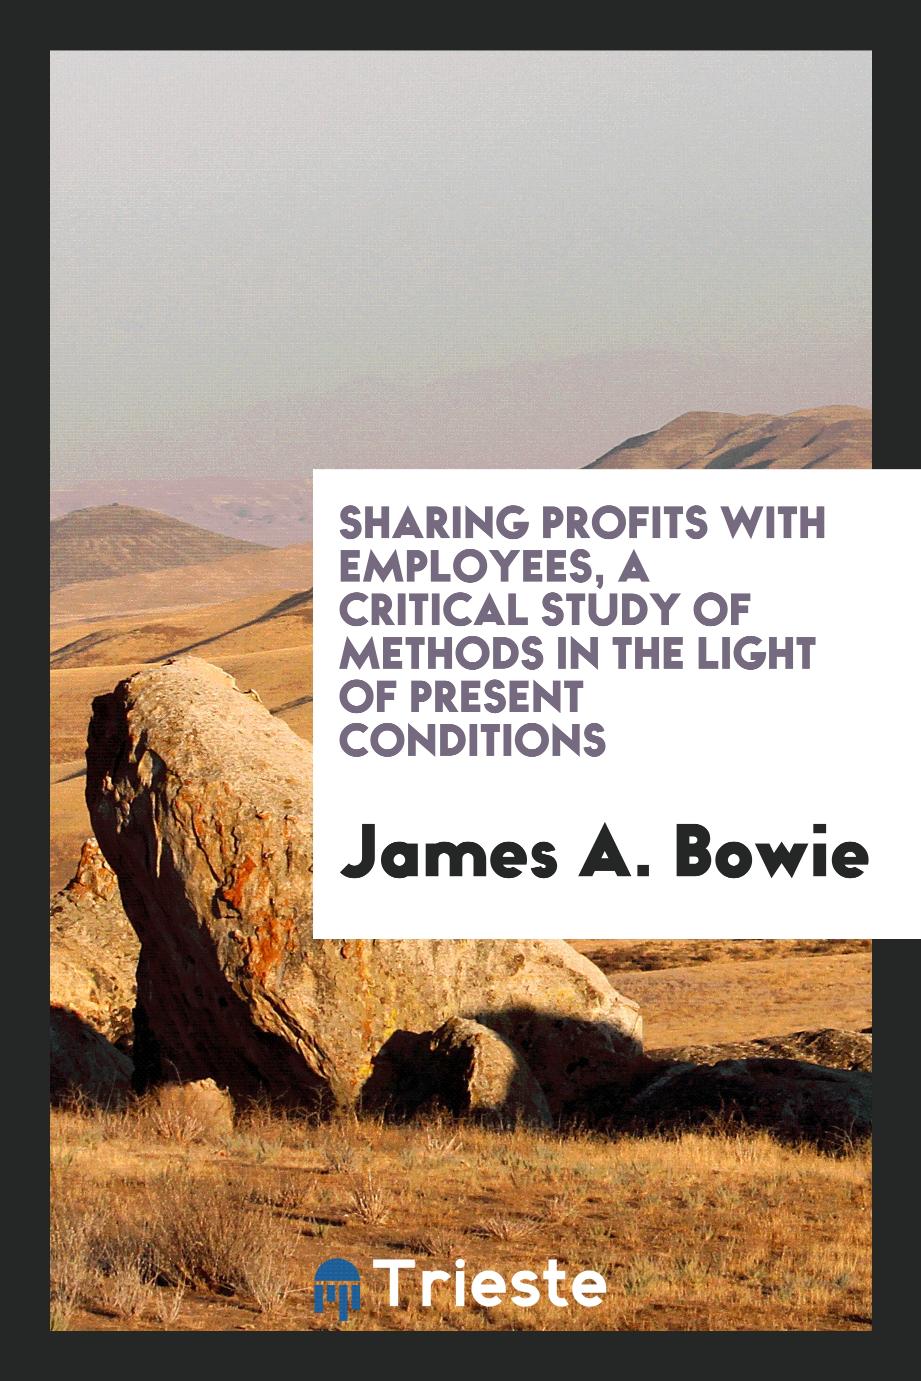 Sharing profits with employees, a critical study of methods in the light of present conditions